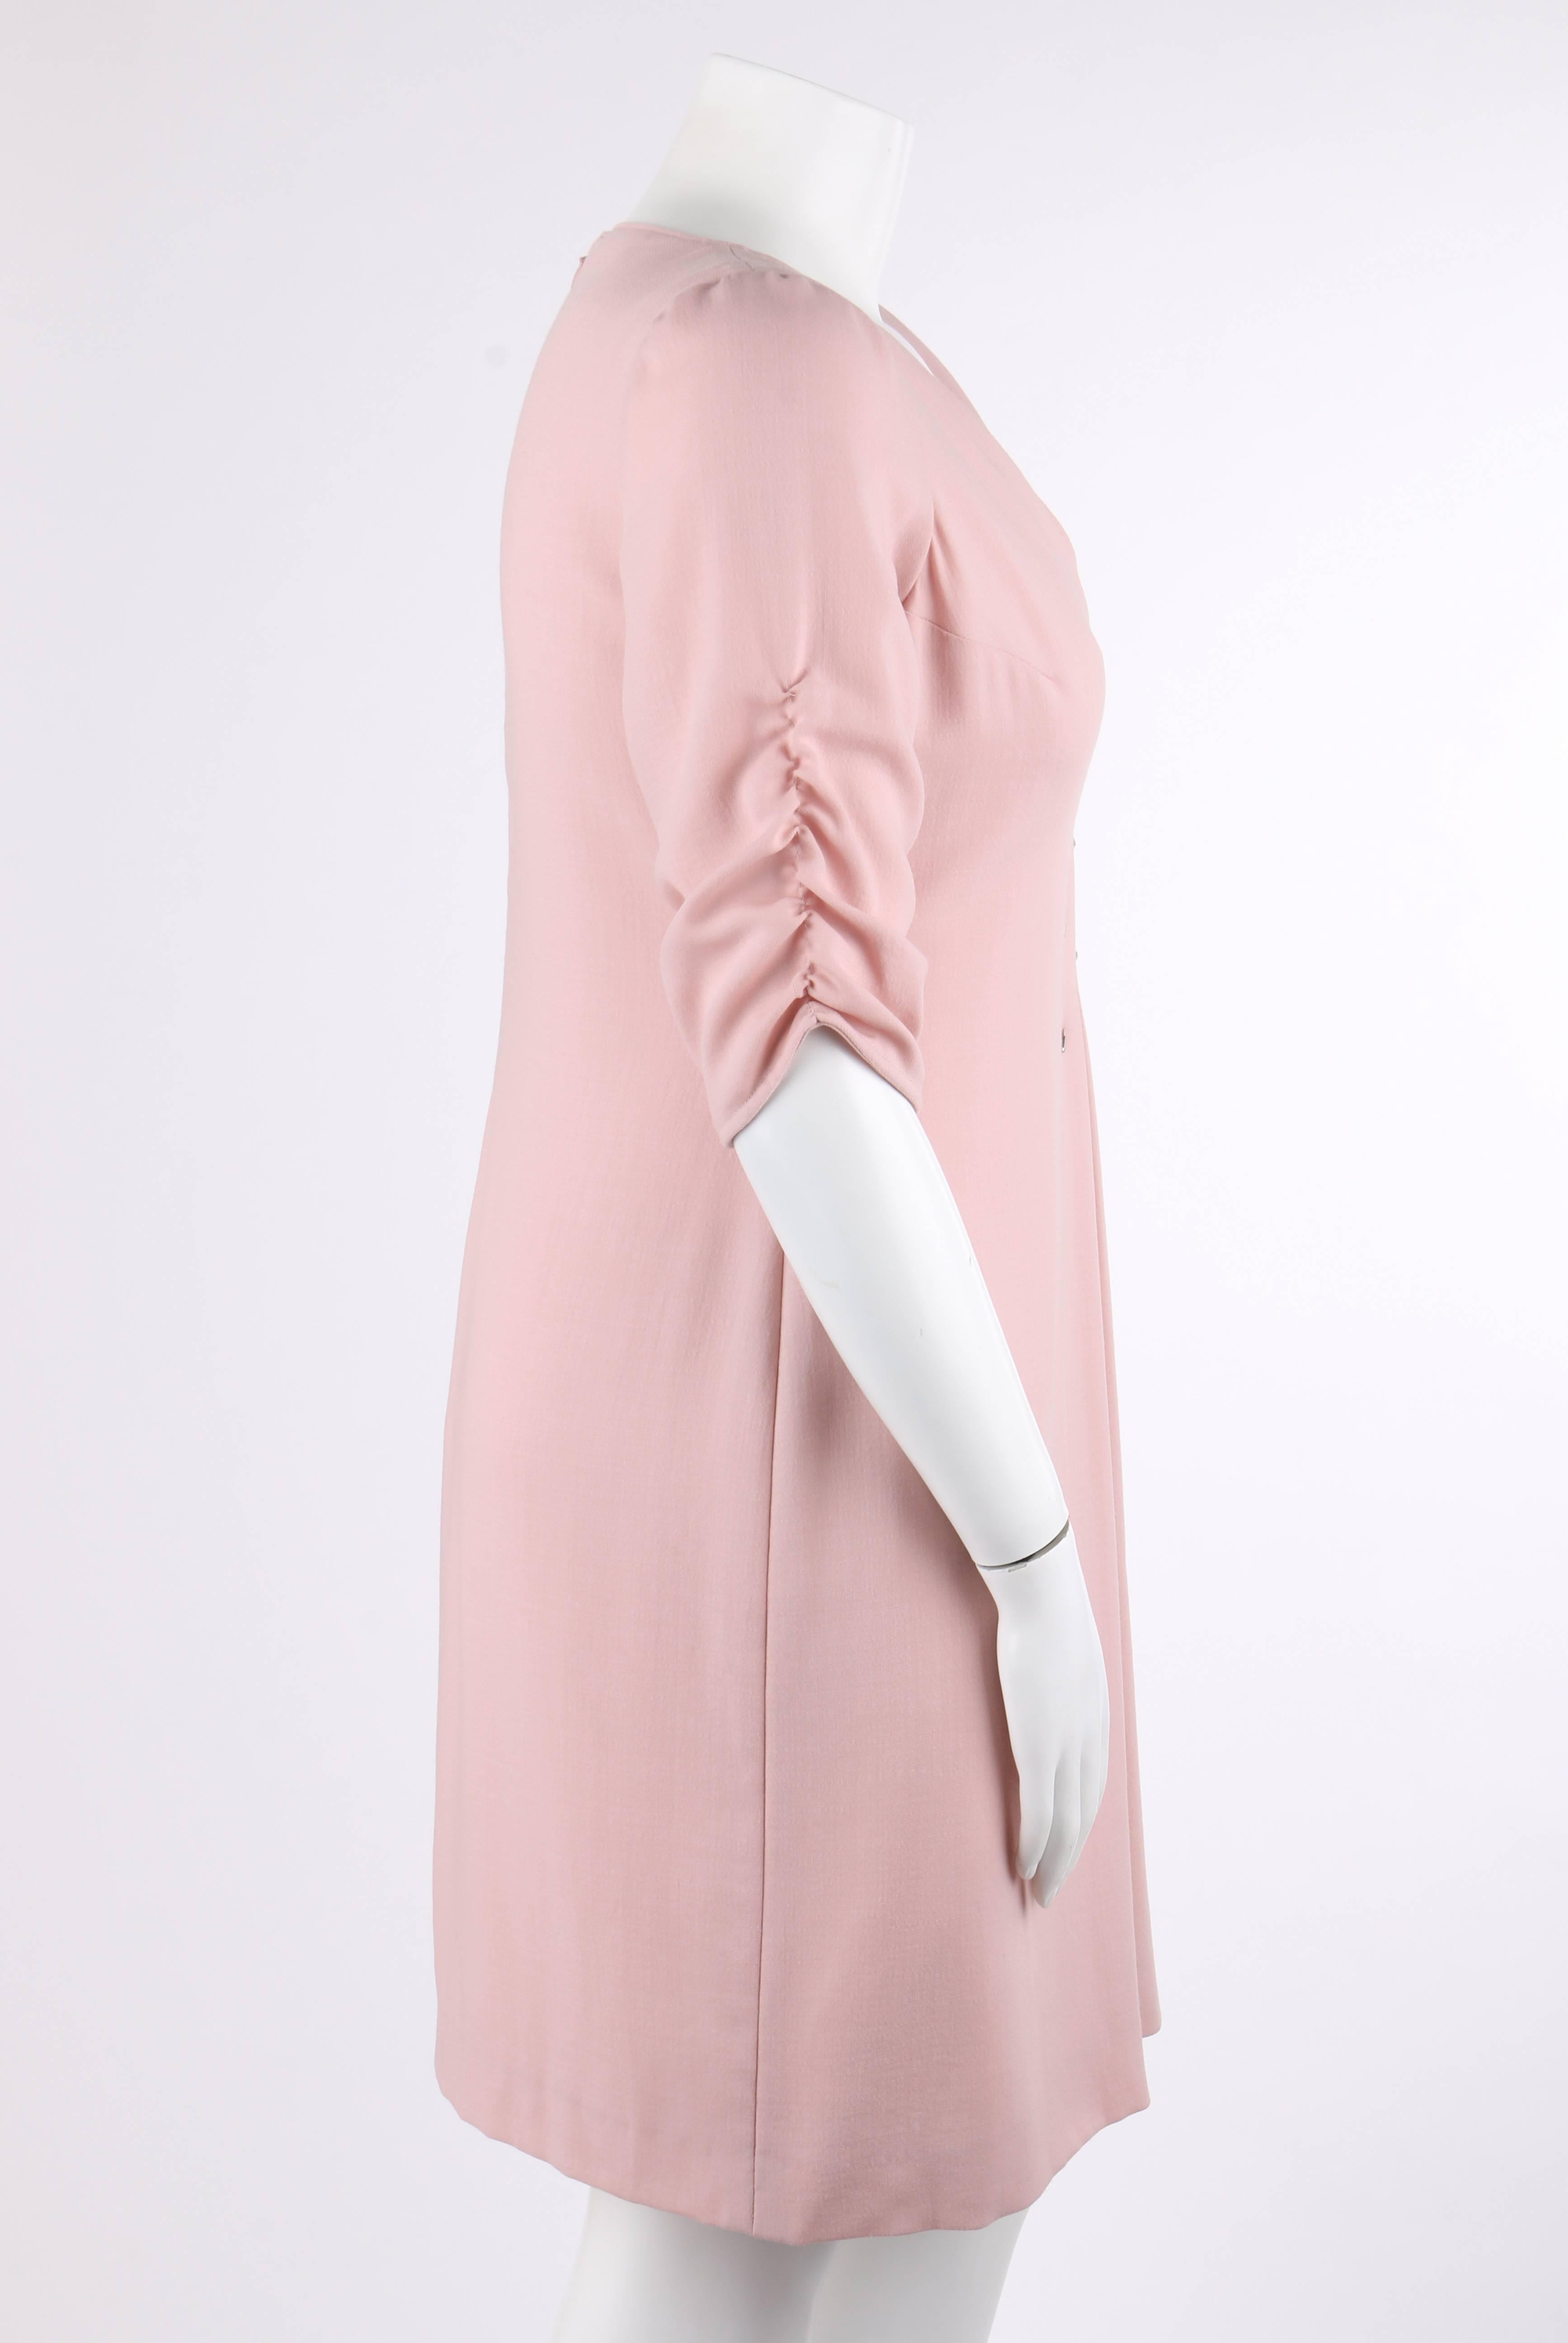 VALENTINO A/W 2007 Blush Pink 100% Wool Ruched Sleeve Cocktail Dress In Excellent Condition For Sale In Thiensville, WI